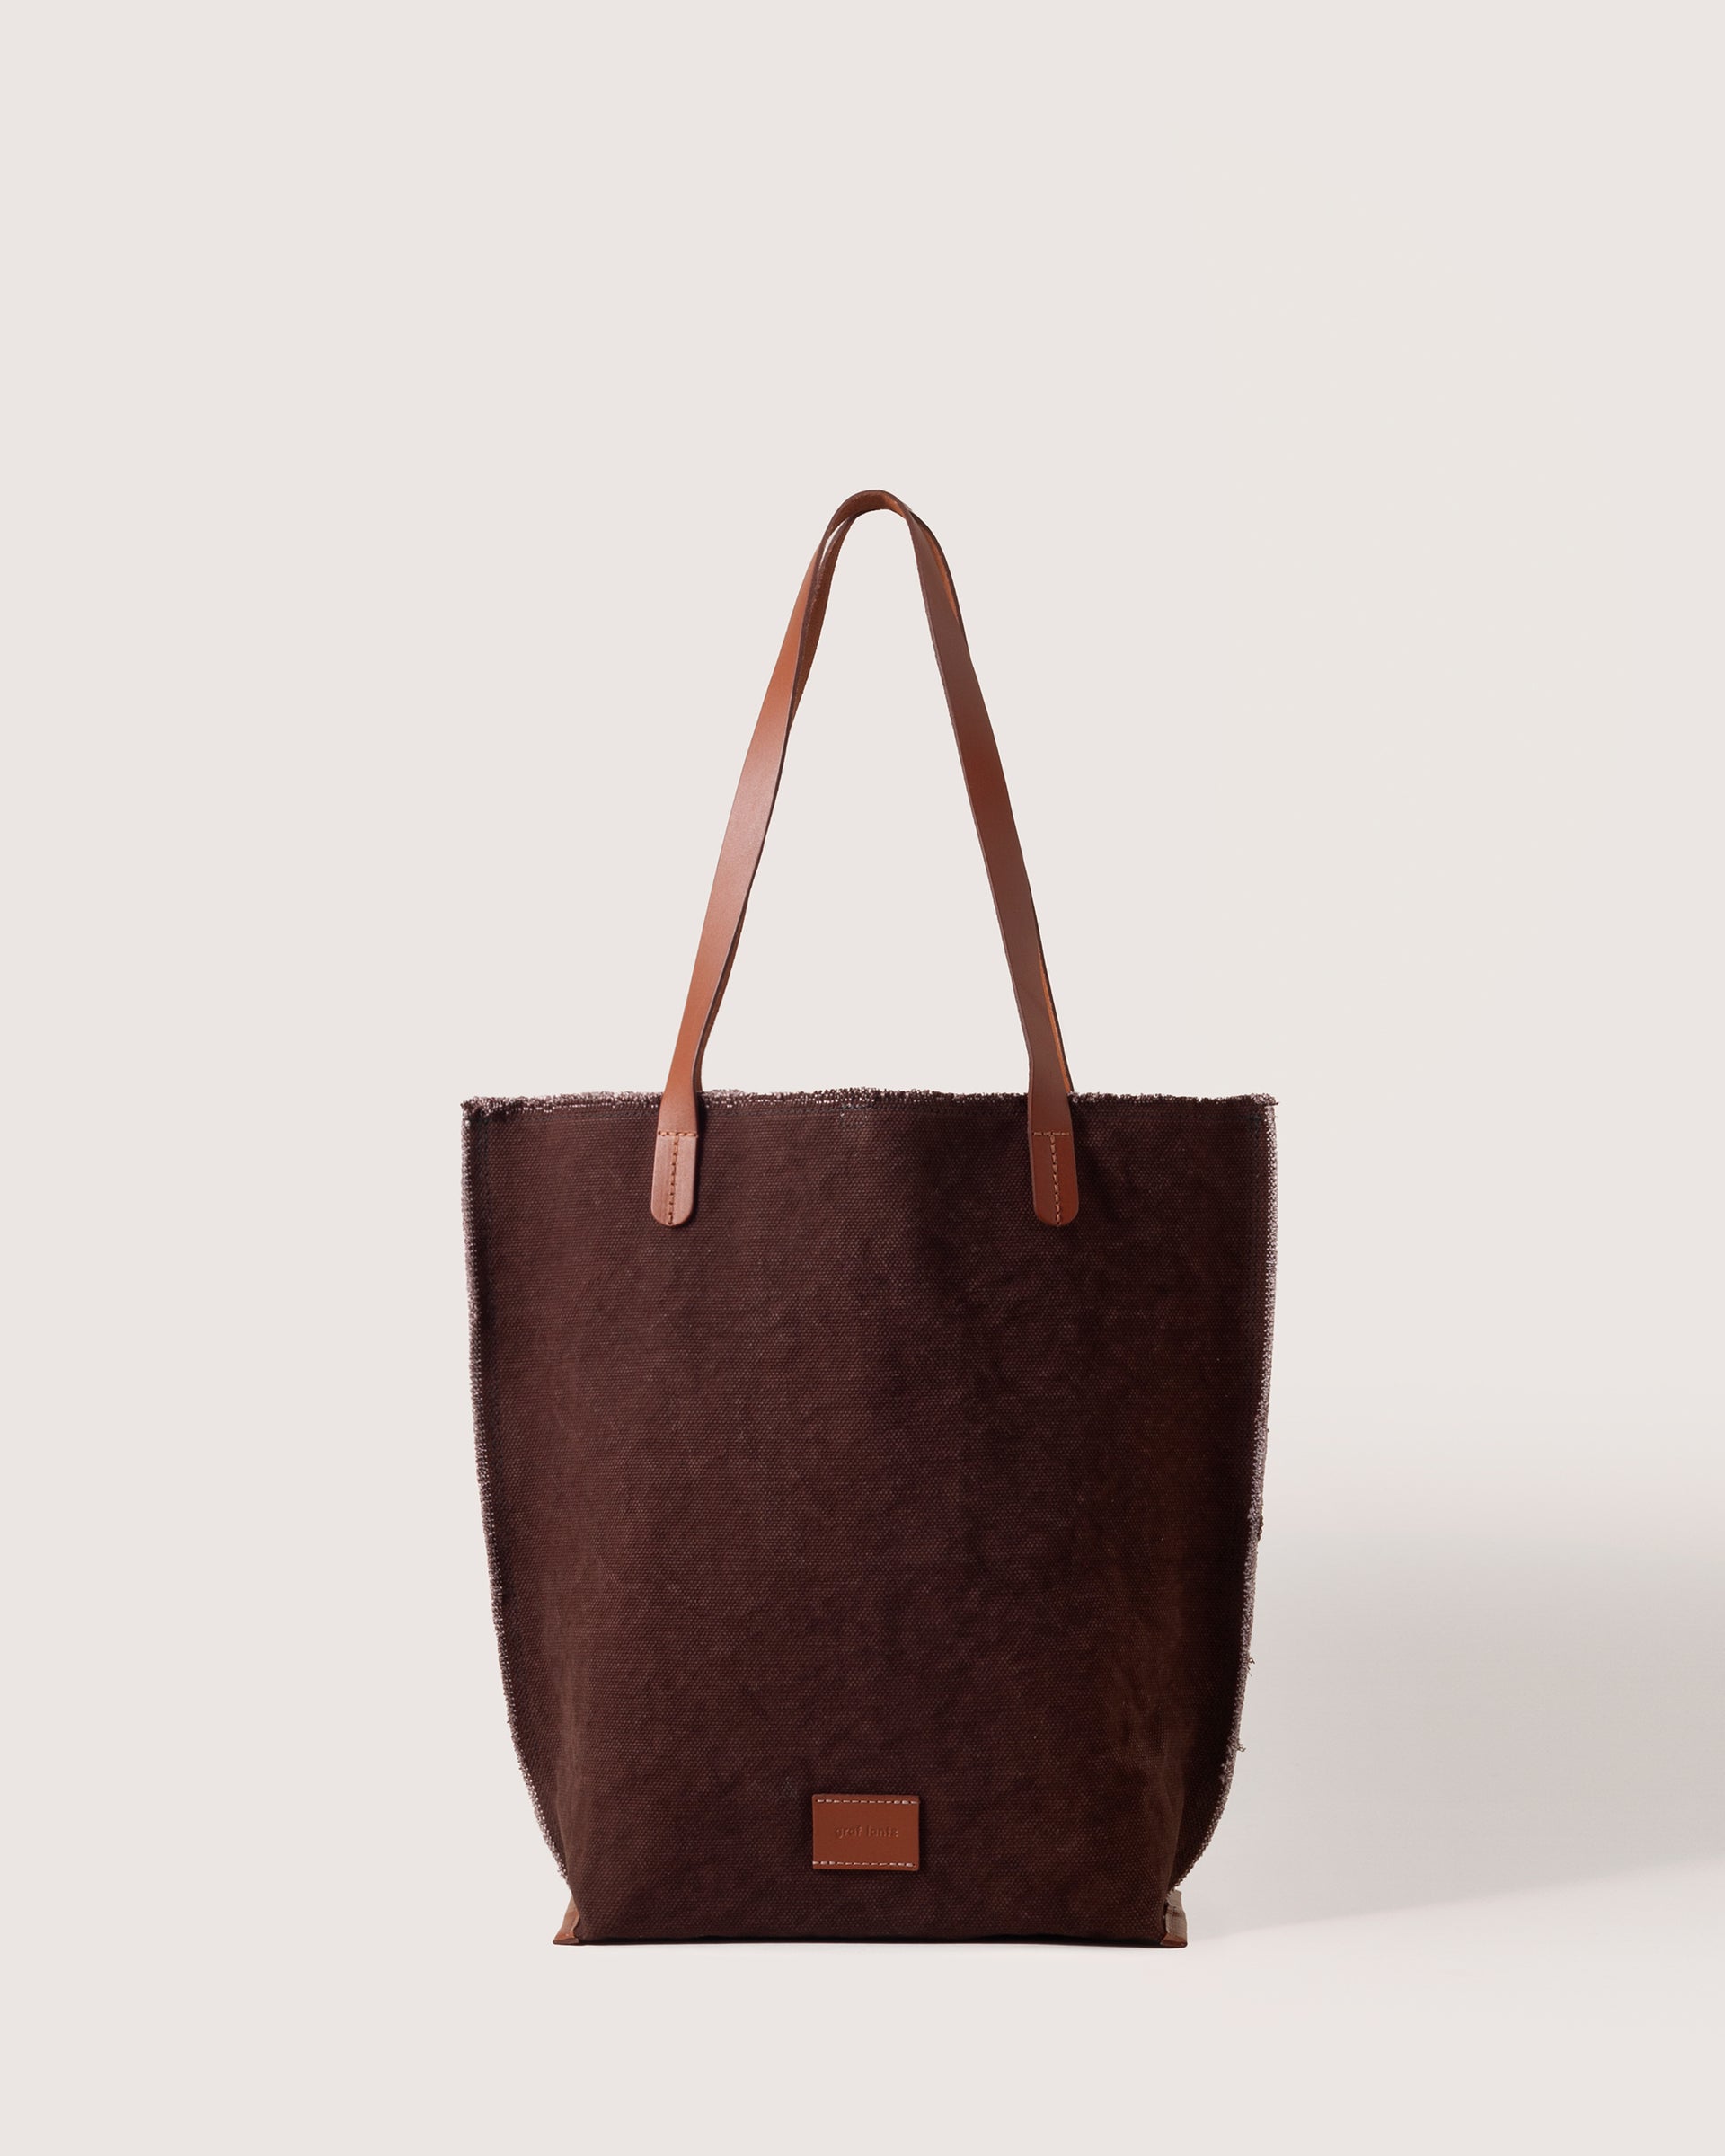 A Hana Canvas Tote in Deep Brown Sienna with dark brown leather handle, white background